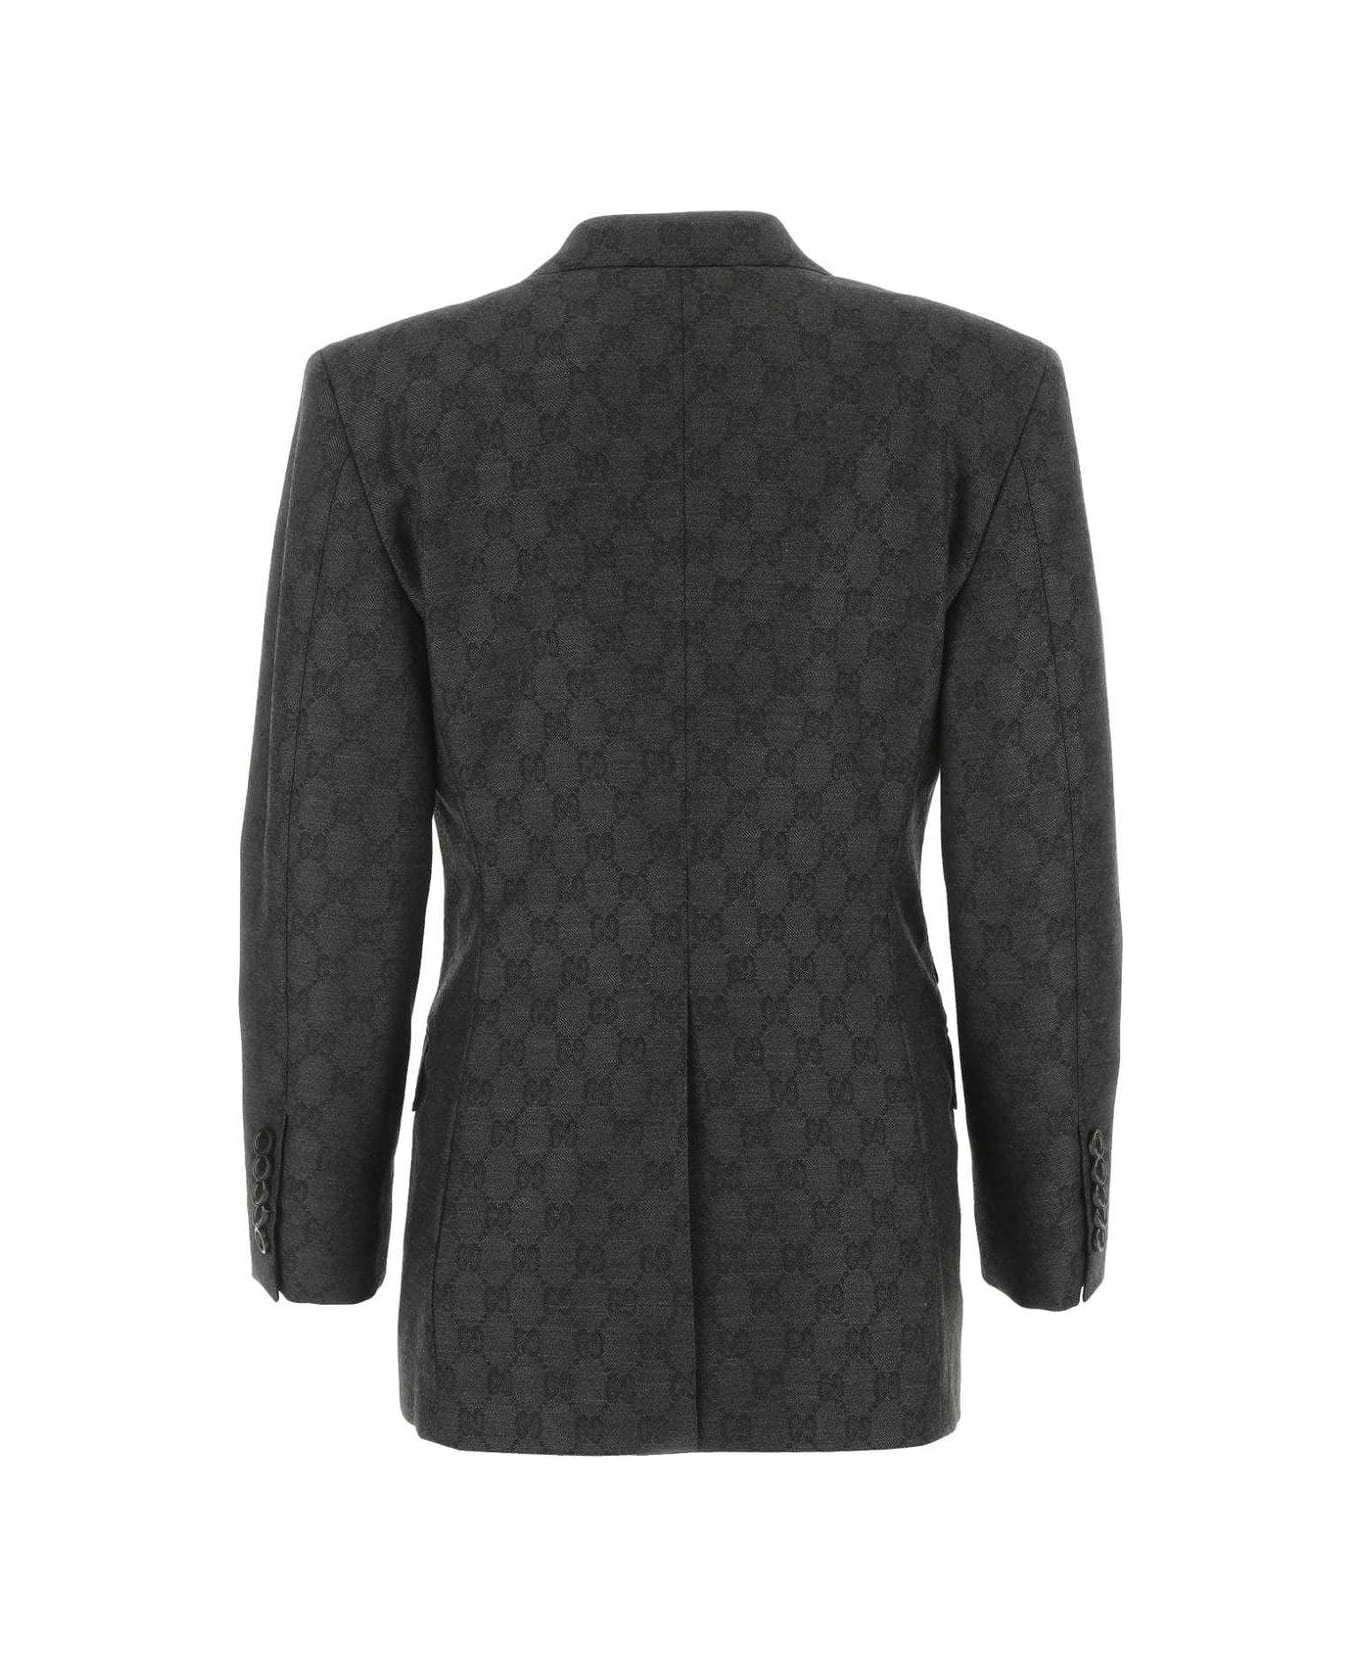 Gucci Gg Jacquard Double-breasted Jacket コート